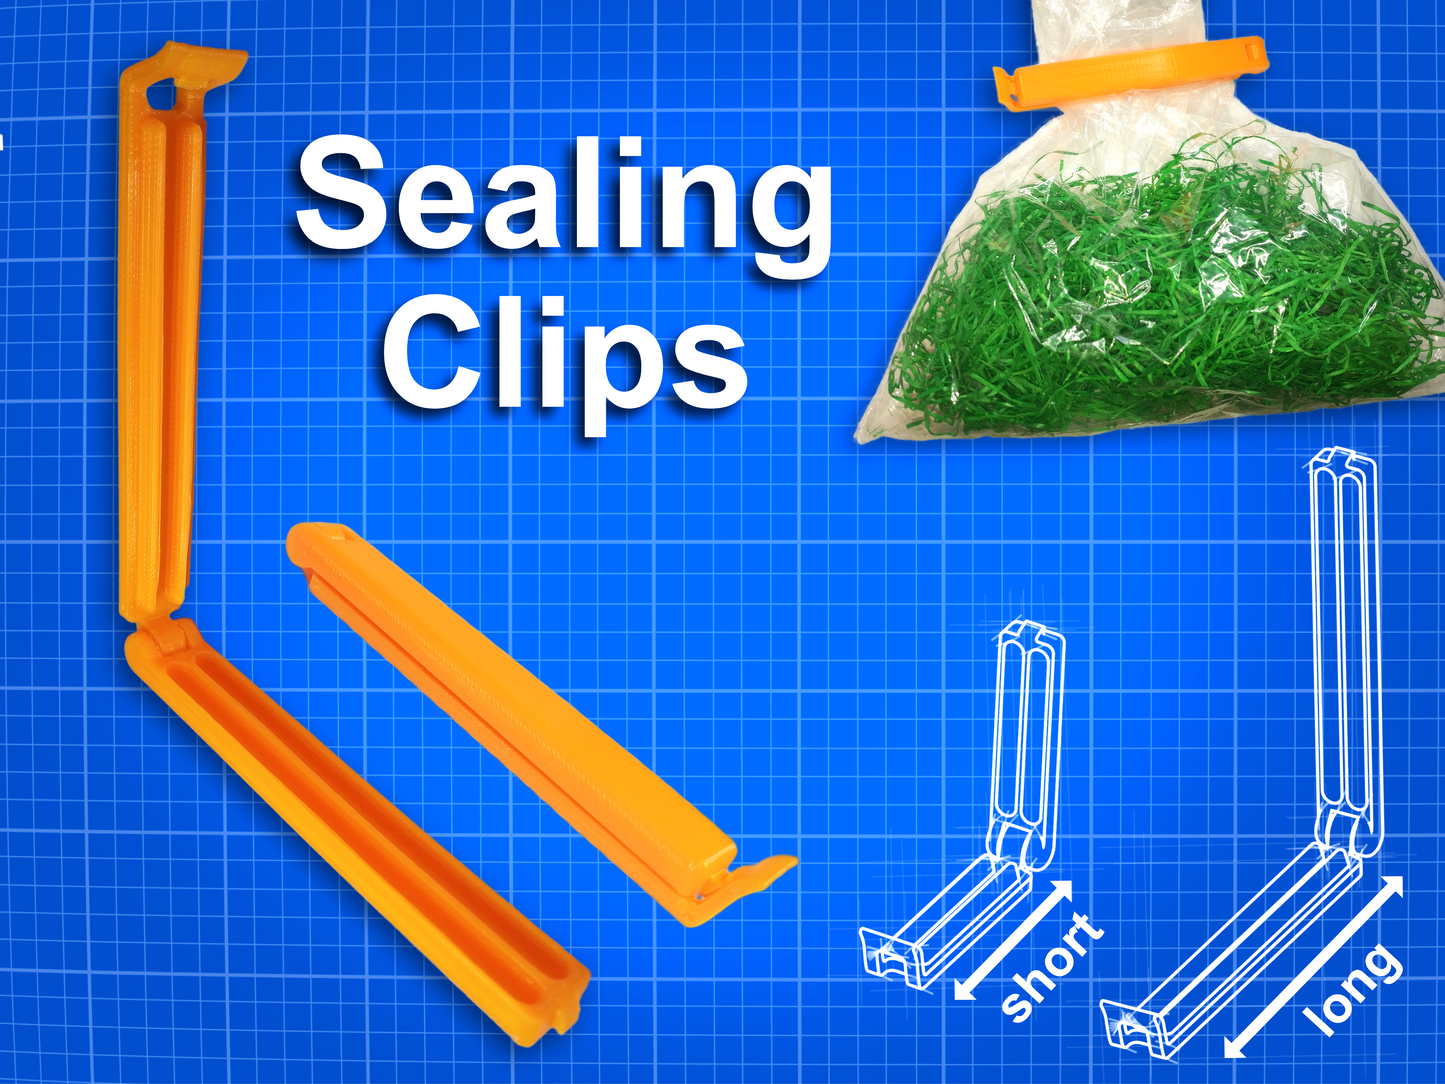 Sealing Clips for bags - Clamp - Sealer - Kitchen